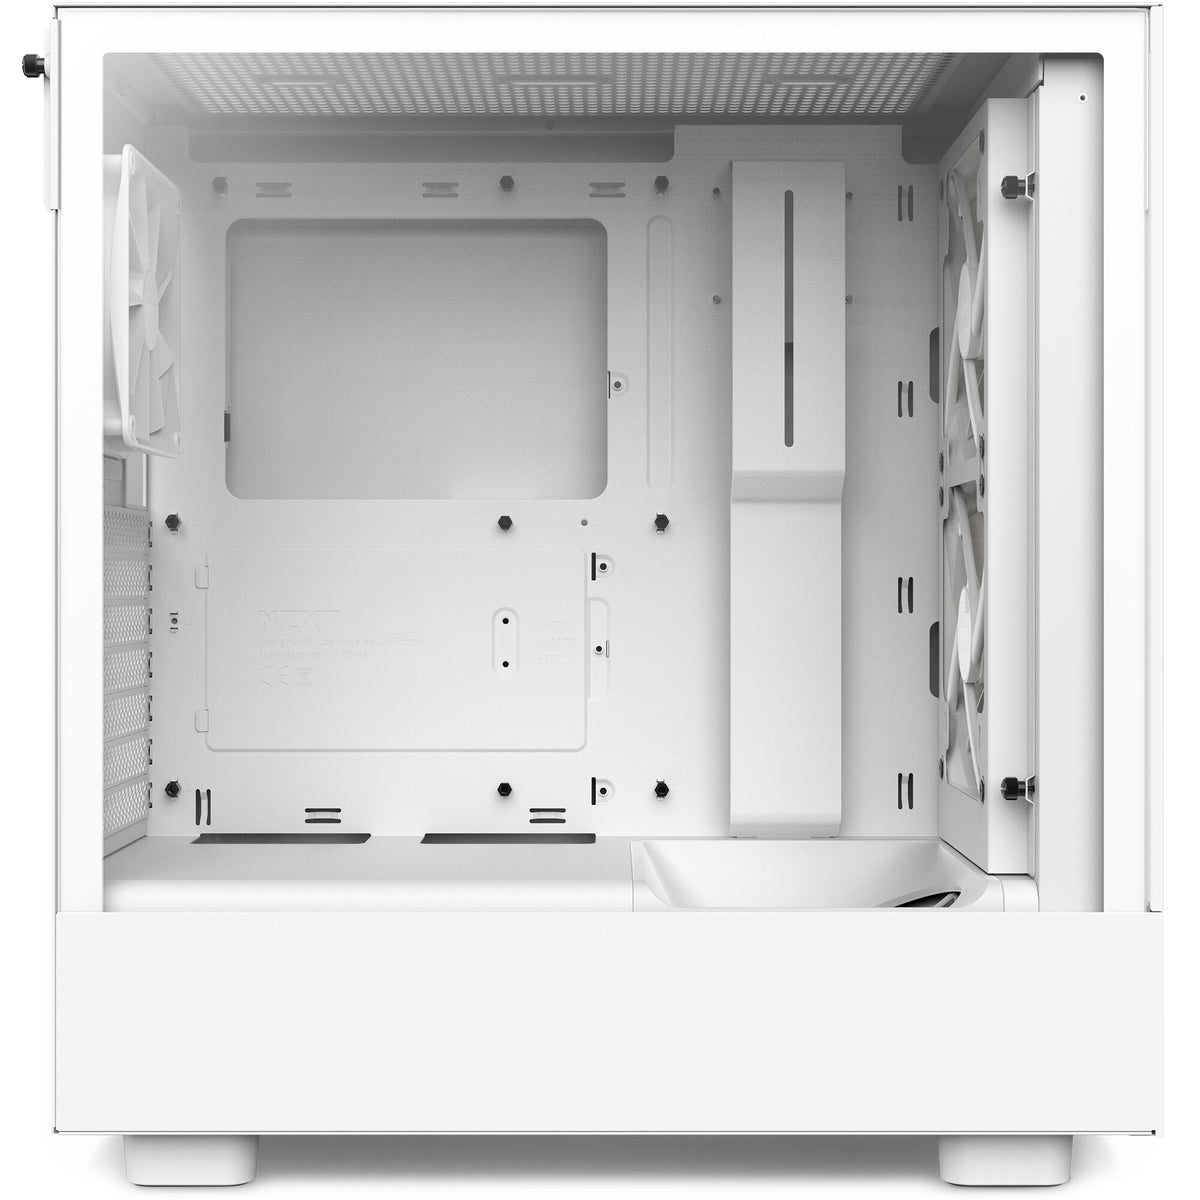 NZXT H5 Flow RGB - ATX Mid Tower Case in White